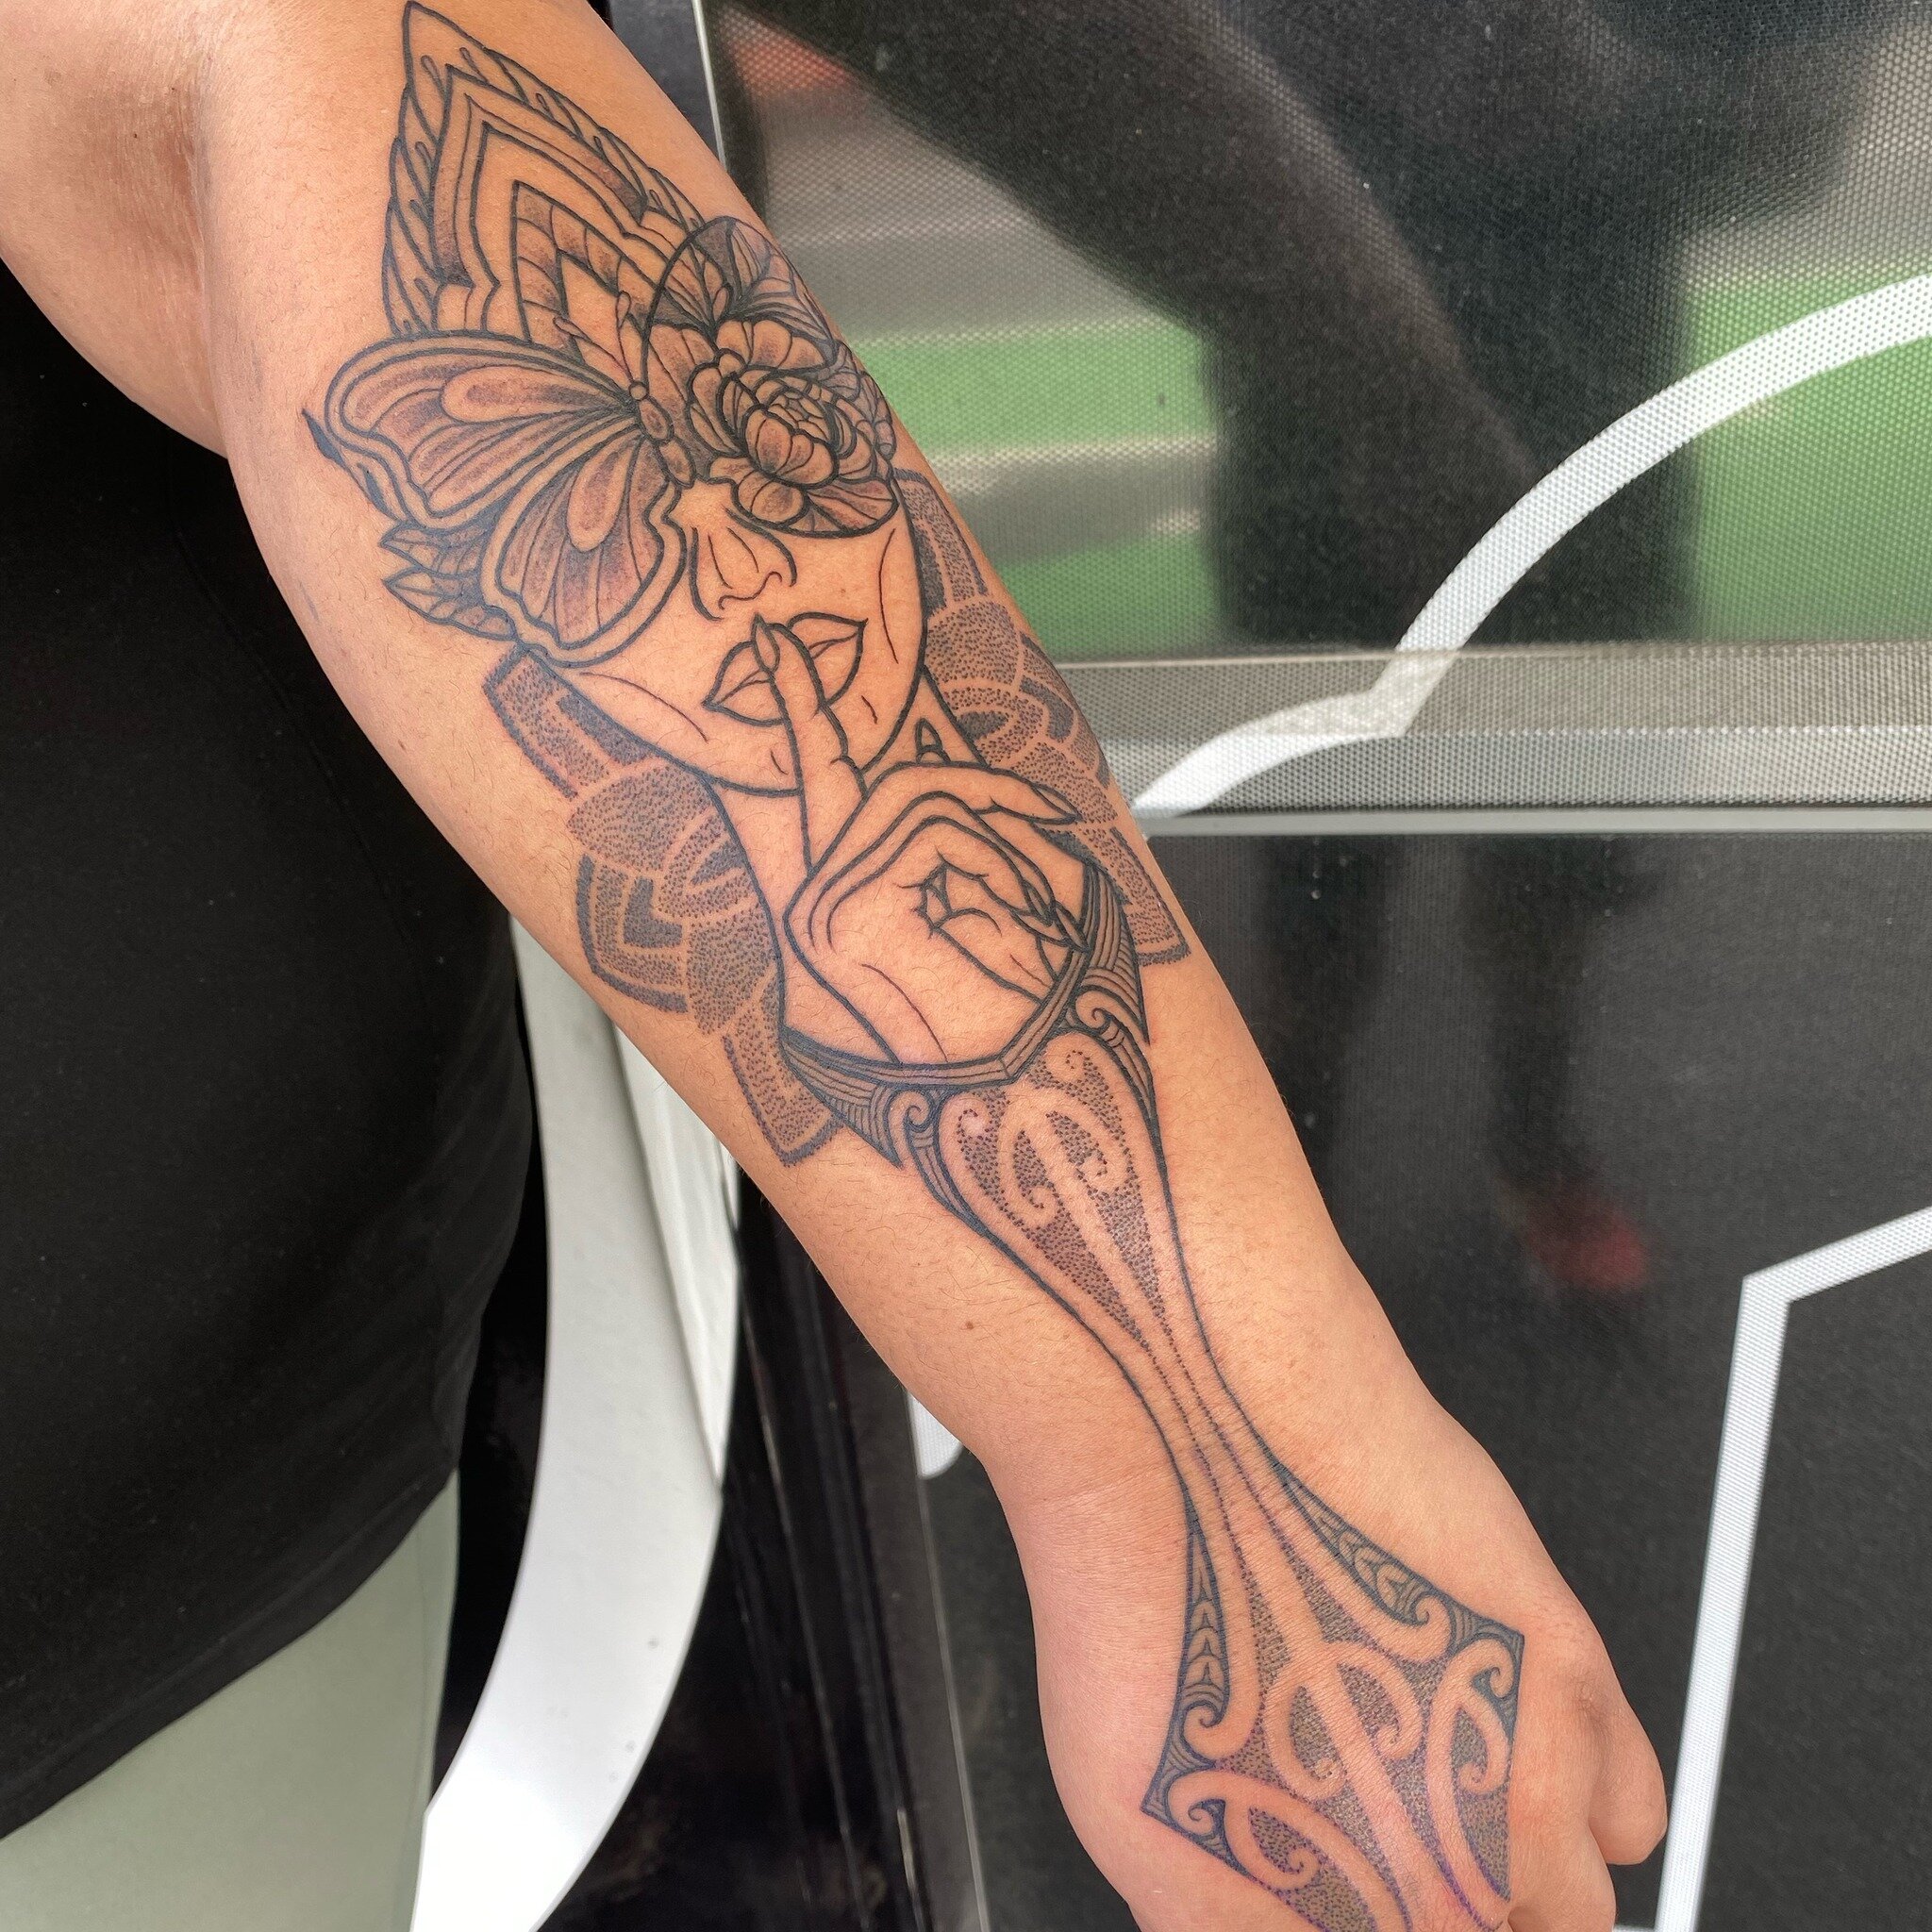 Customs forearm piece by @inked_by_heat 
Incorporating mandala and Tā Moko.

Dm to have a chat about starting your next project !

Laybuy and Afterpay available